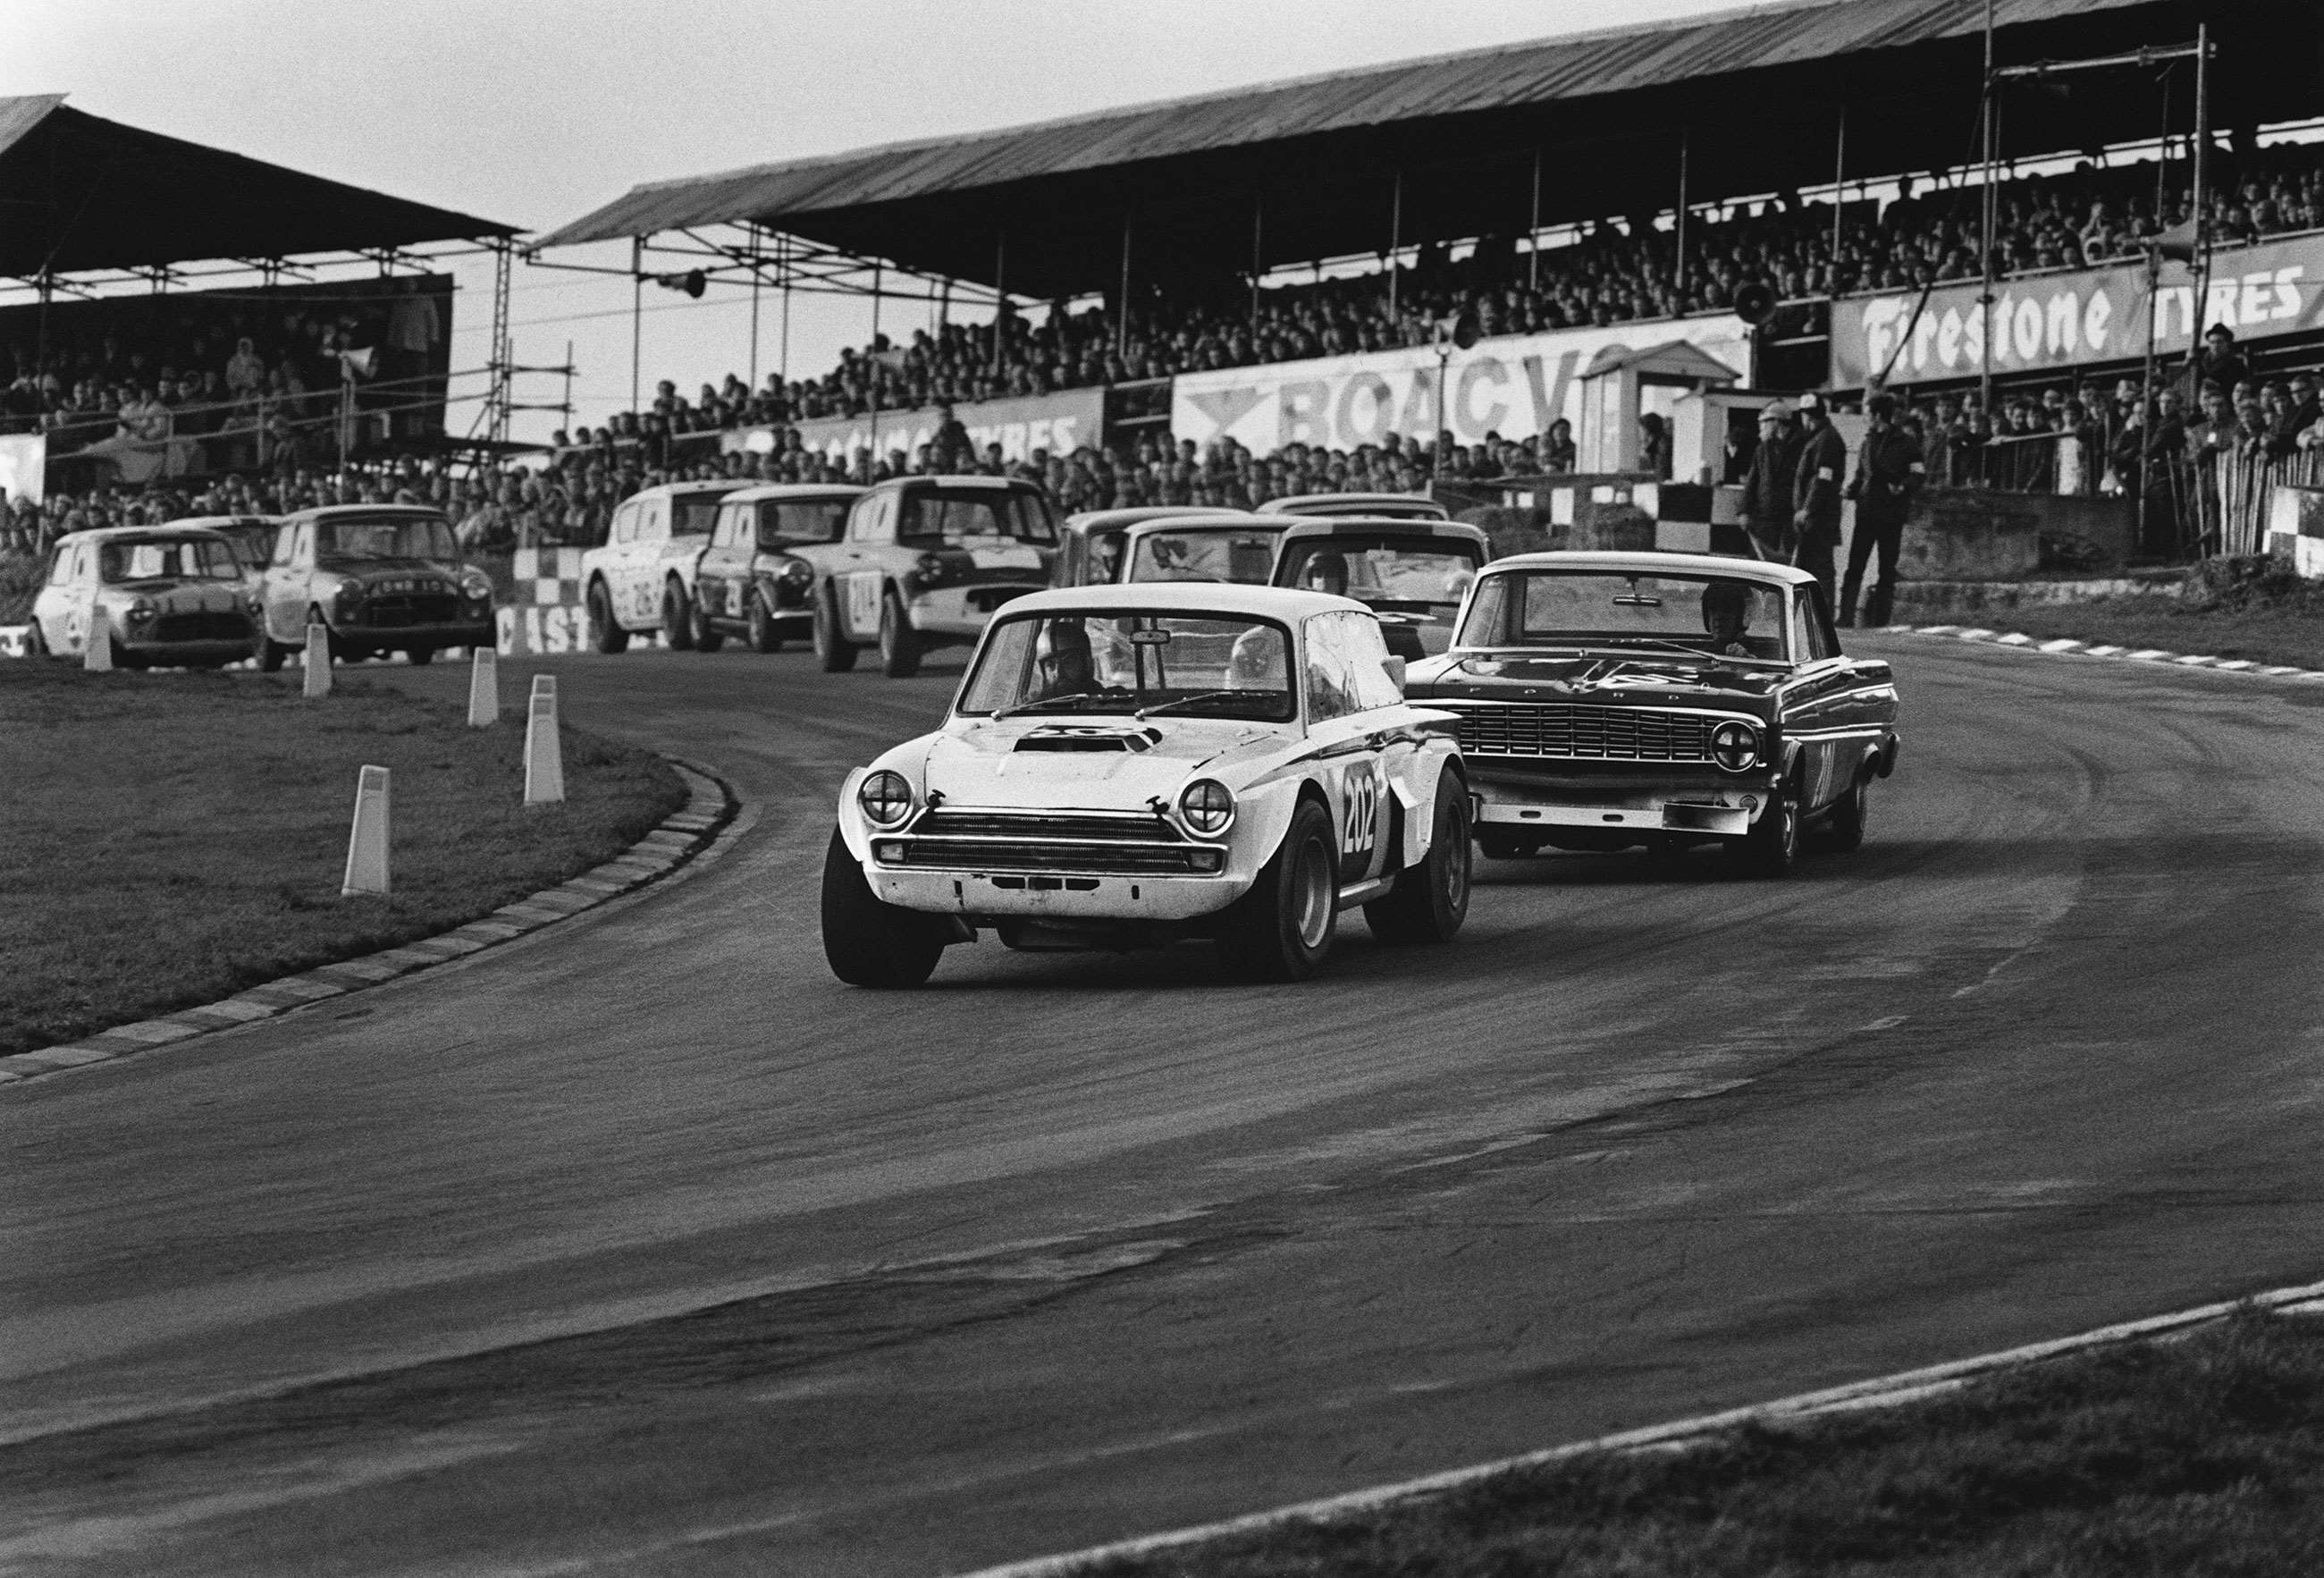 Another from Brands Hatch, this time in 1968. Brian Robinson in his Ford Lotus Cortina leads Brian Muir in a Ford Falcon Sprint.